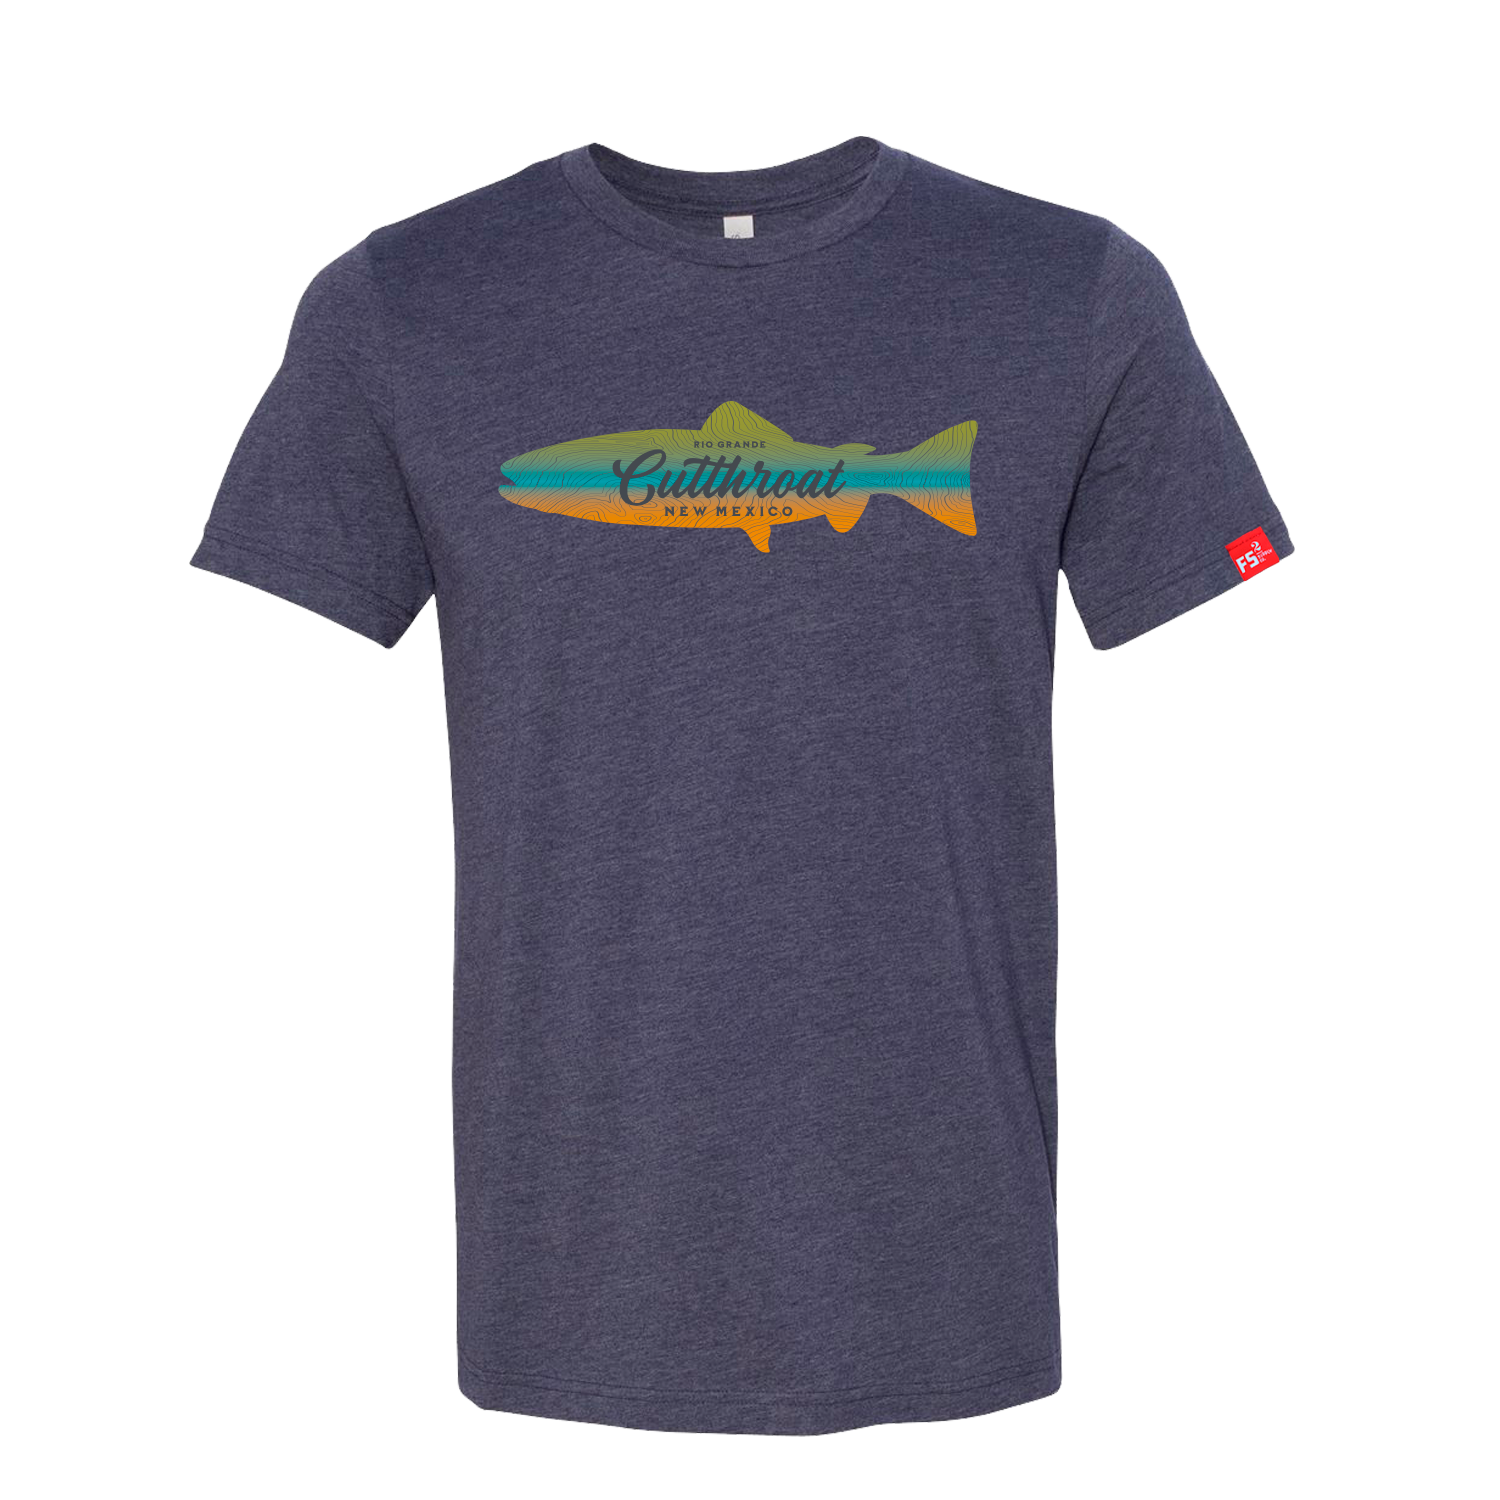 New Mexico Cutthroat T-Shirt